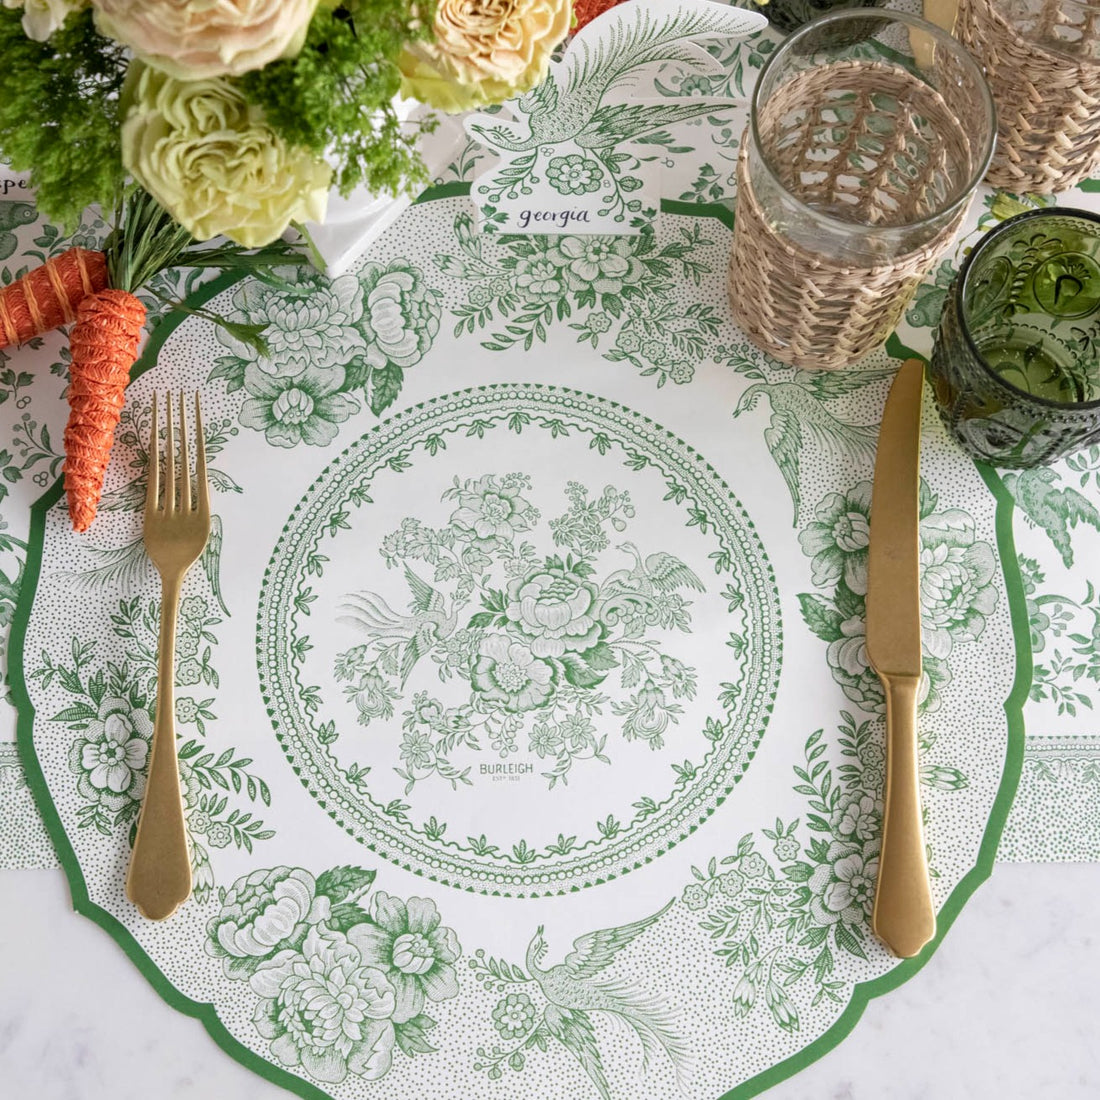 The Die-cut Green Asiatic Pheasants Placemat in an elegant place setting sans plate, from above.